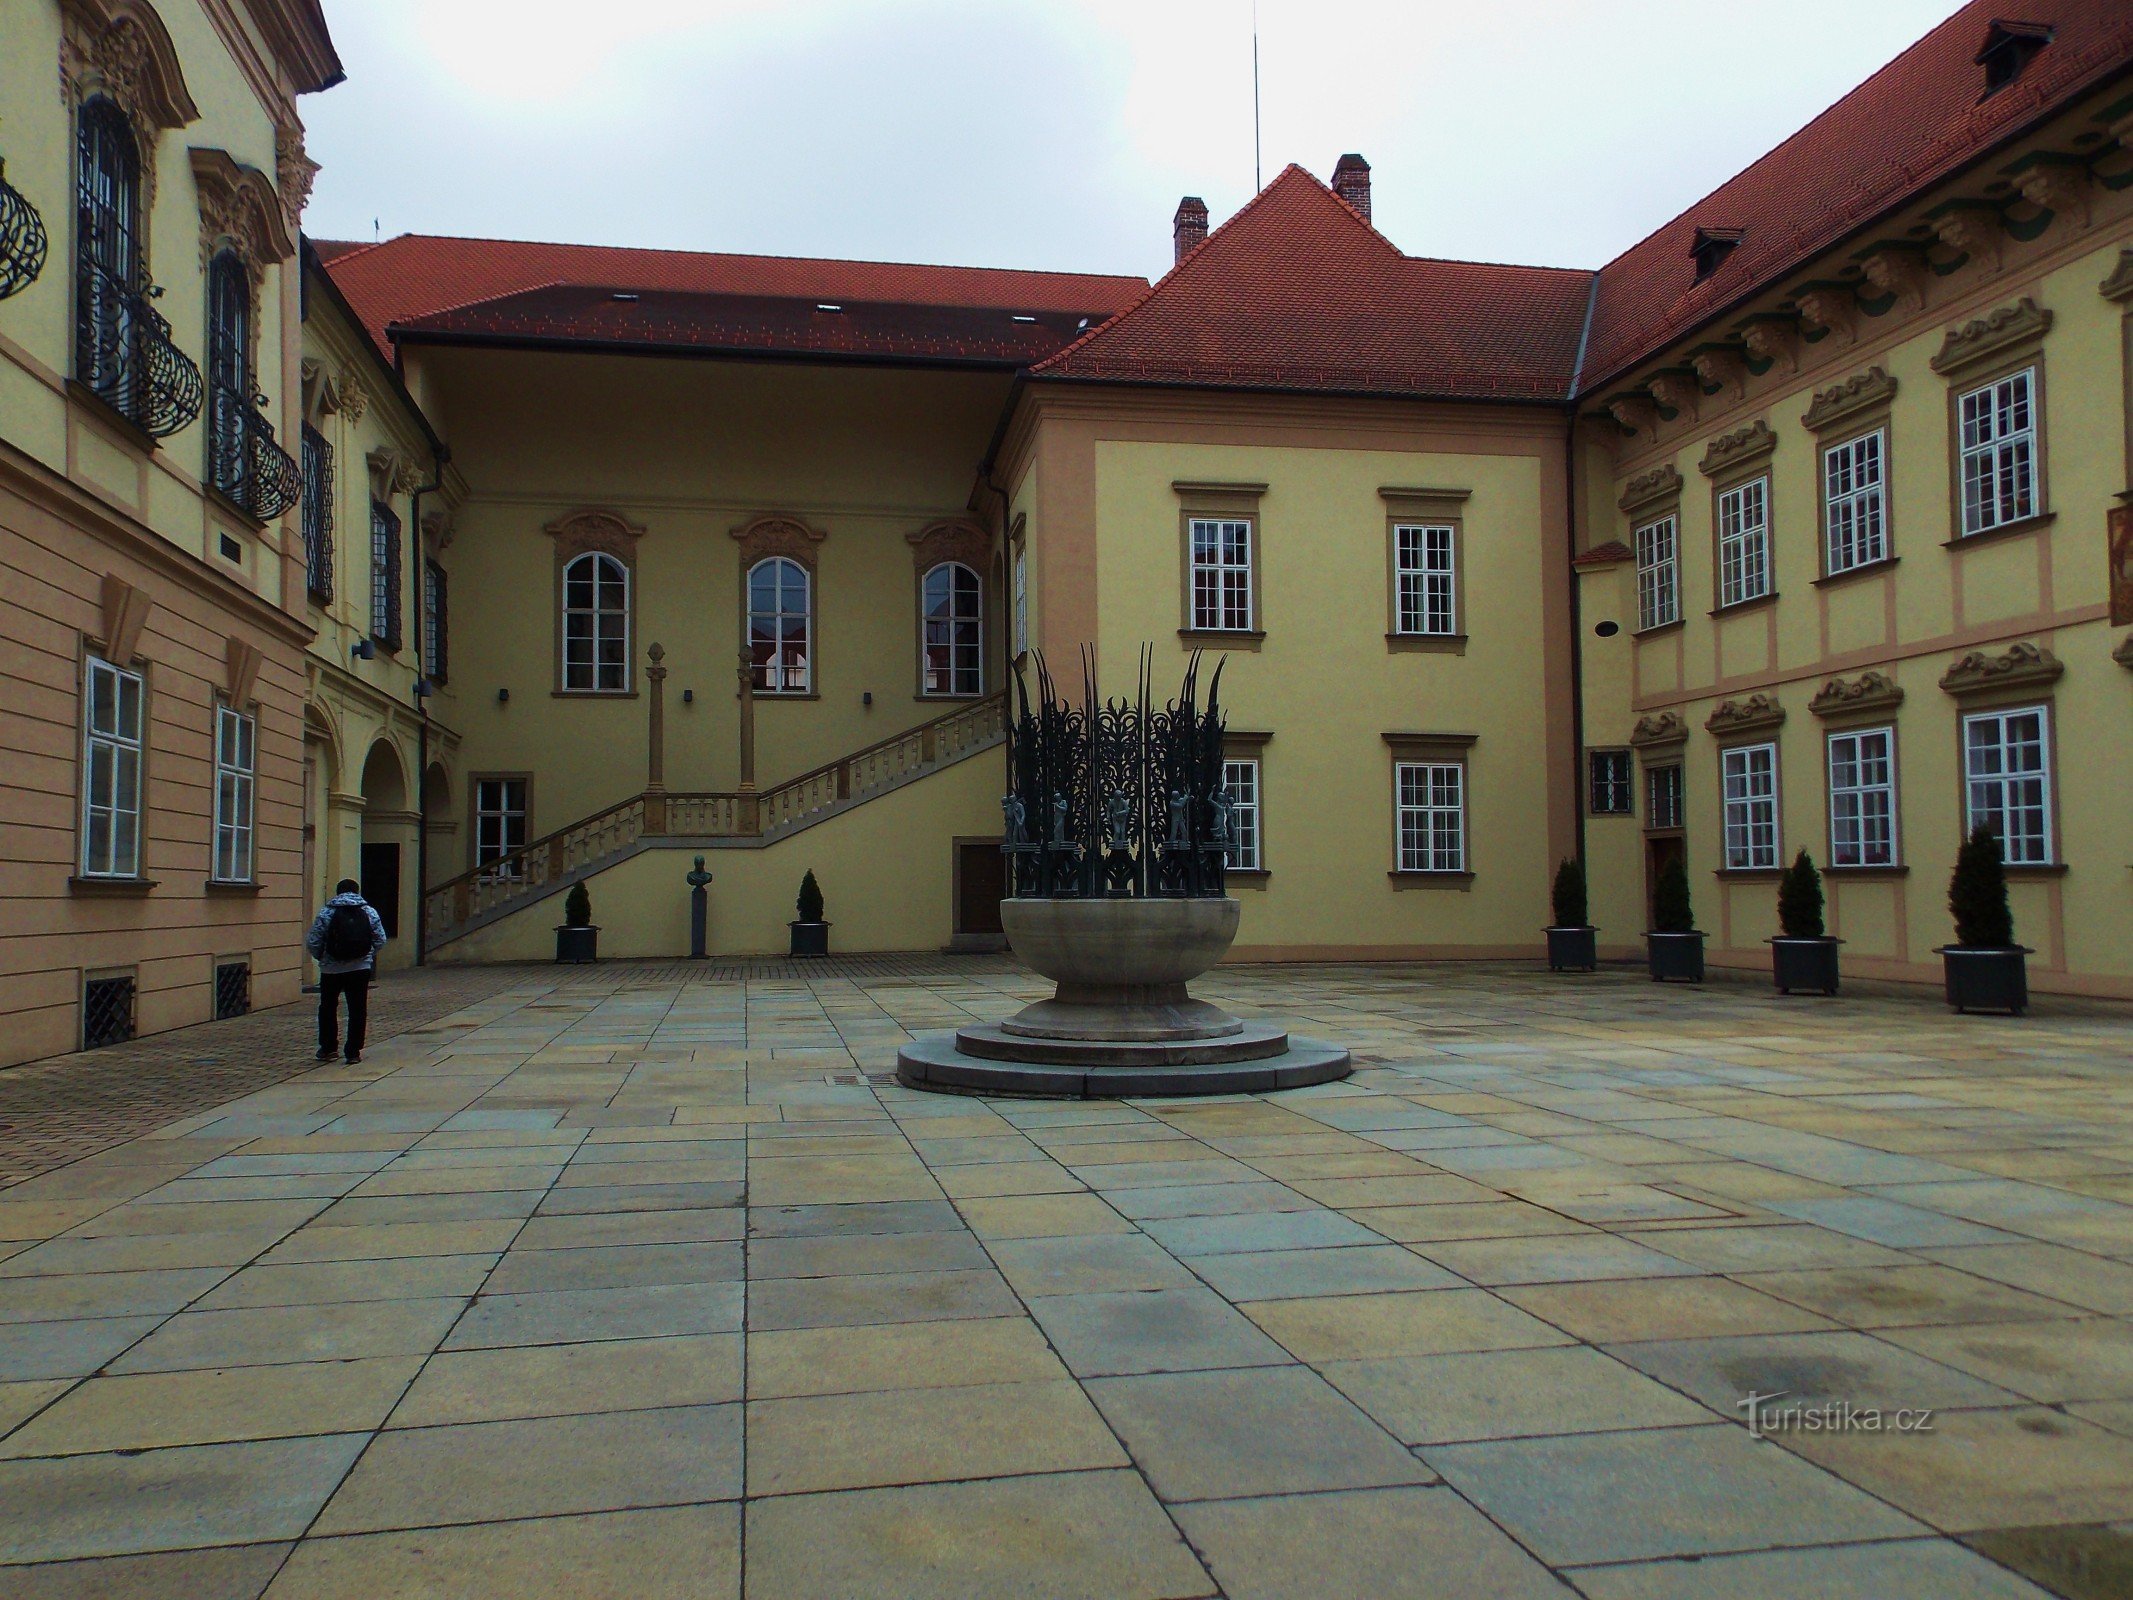 Cultural monument of Brno - New Town Hall